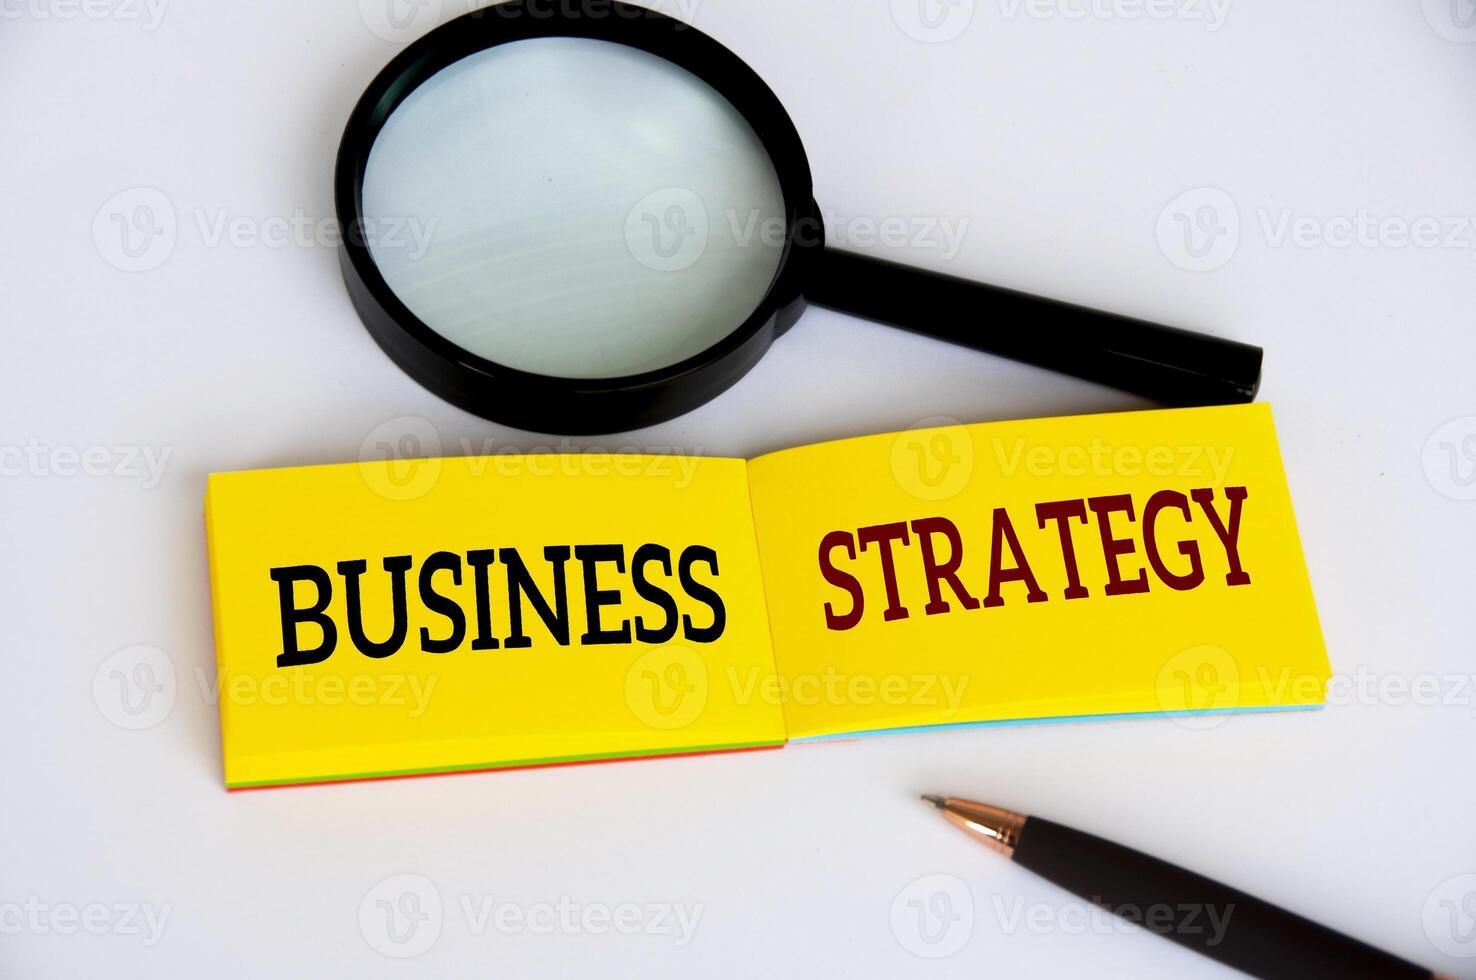 Business strategy text on yellow notepad with magnifying glass and pen on white background. Business strategy concept photo